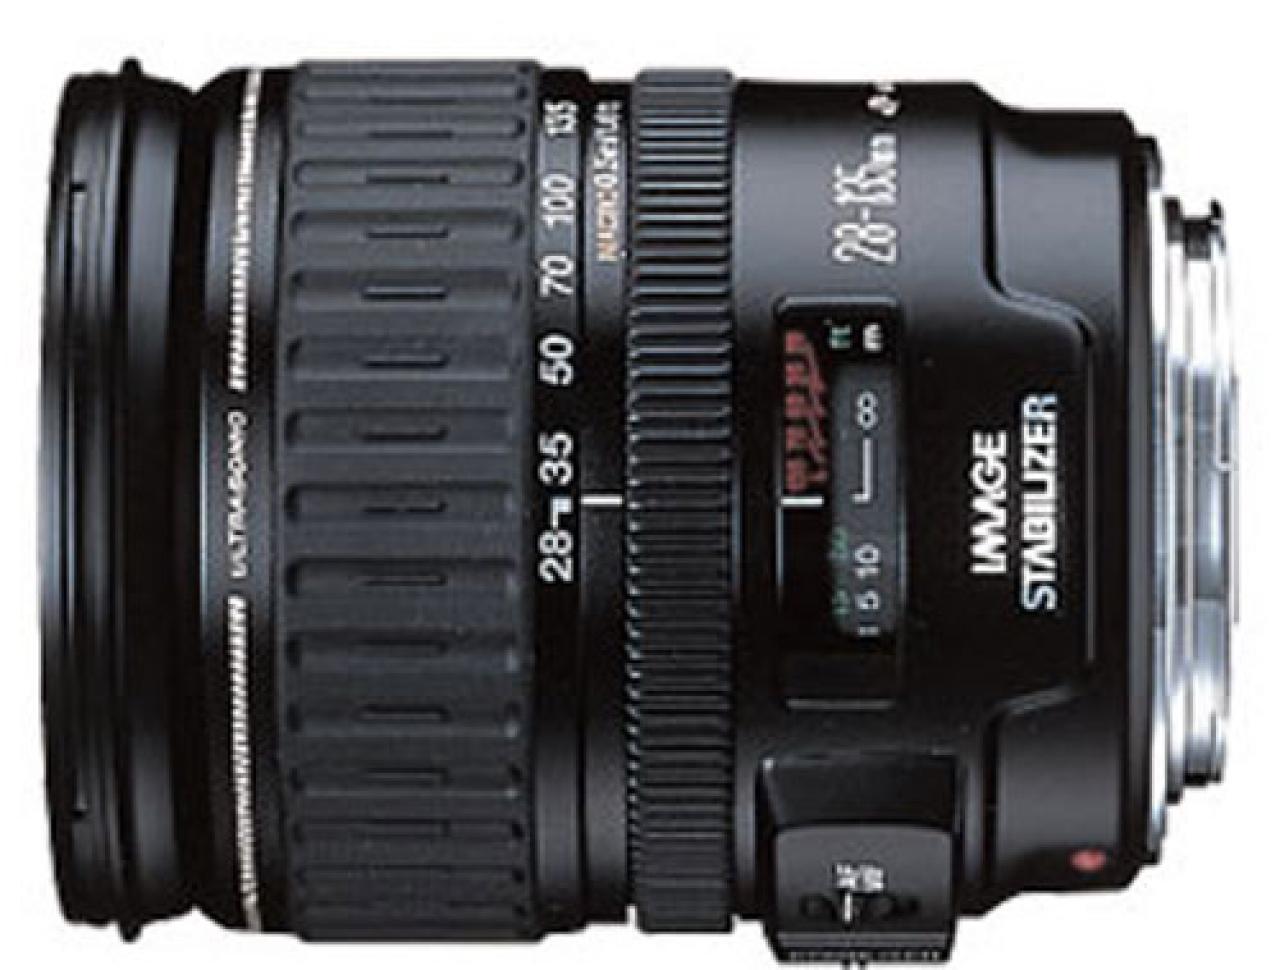 Canon EF 28 - 135mm f3.5 - 5.6 IS USM